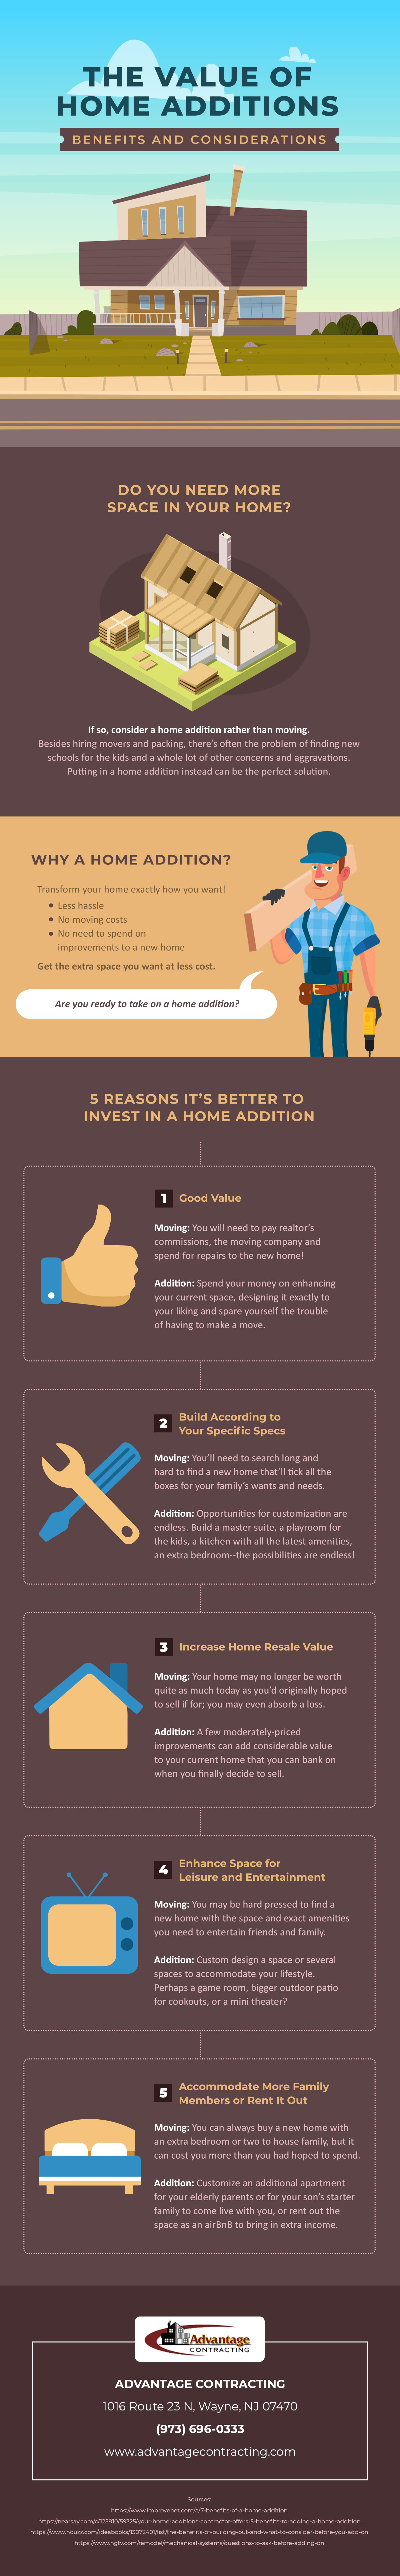 Infographic: The Value of Home Additions